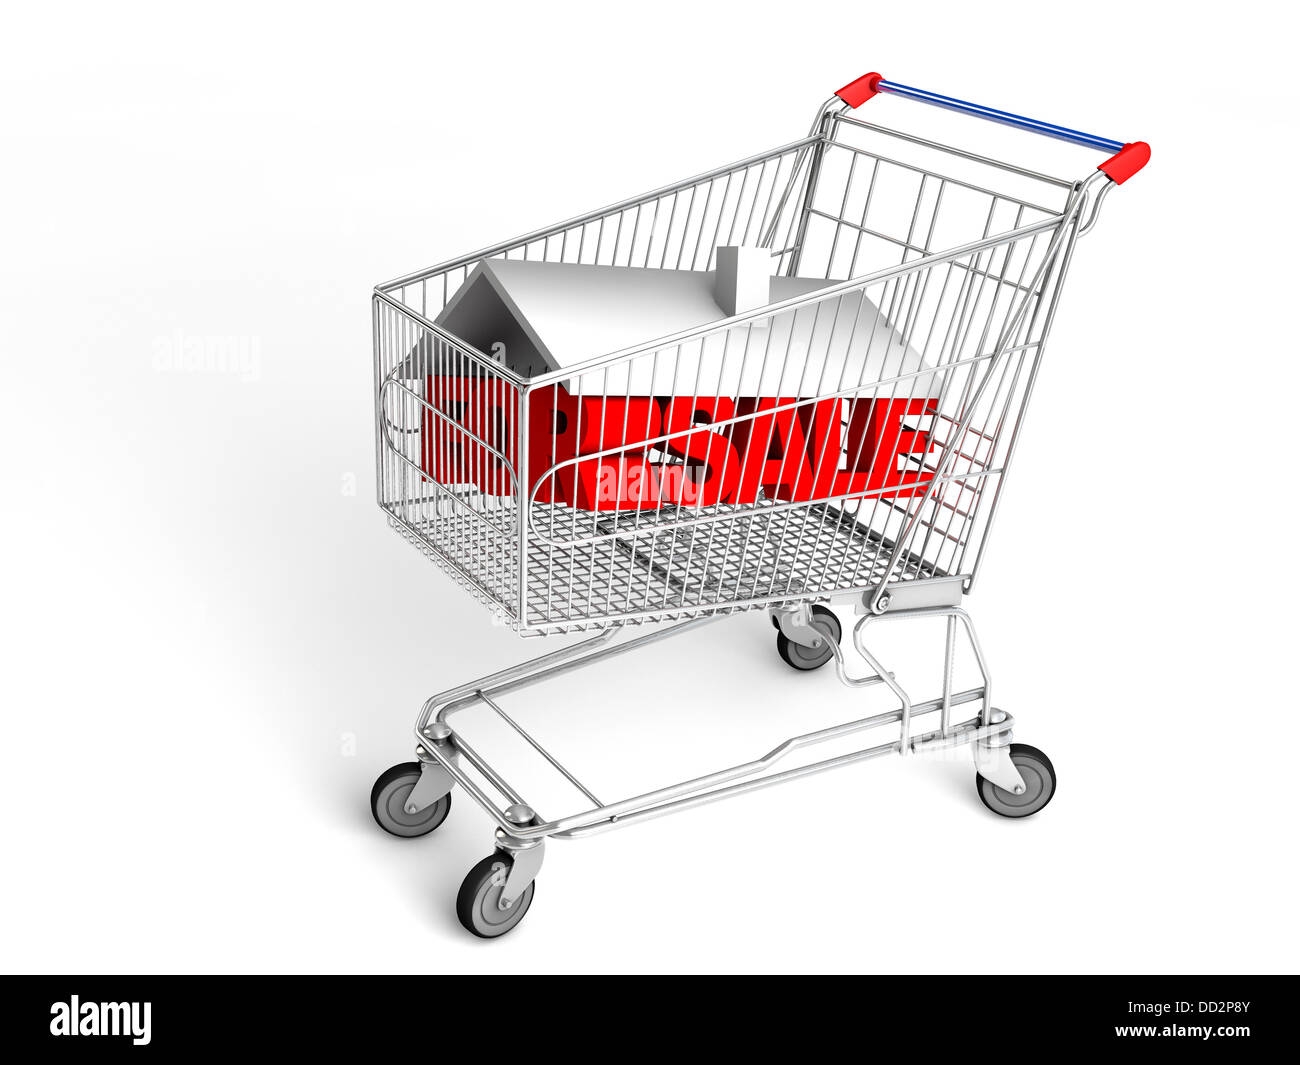 For sale House in shopping cart Stock Photo